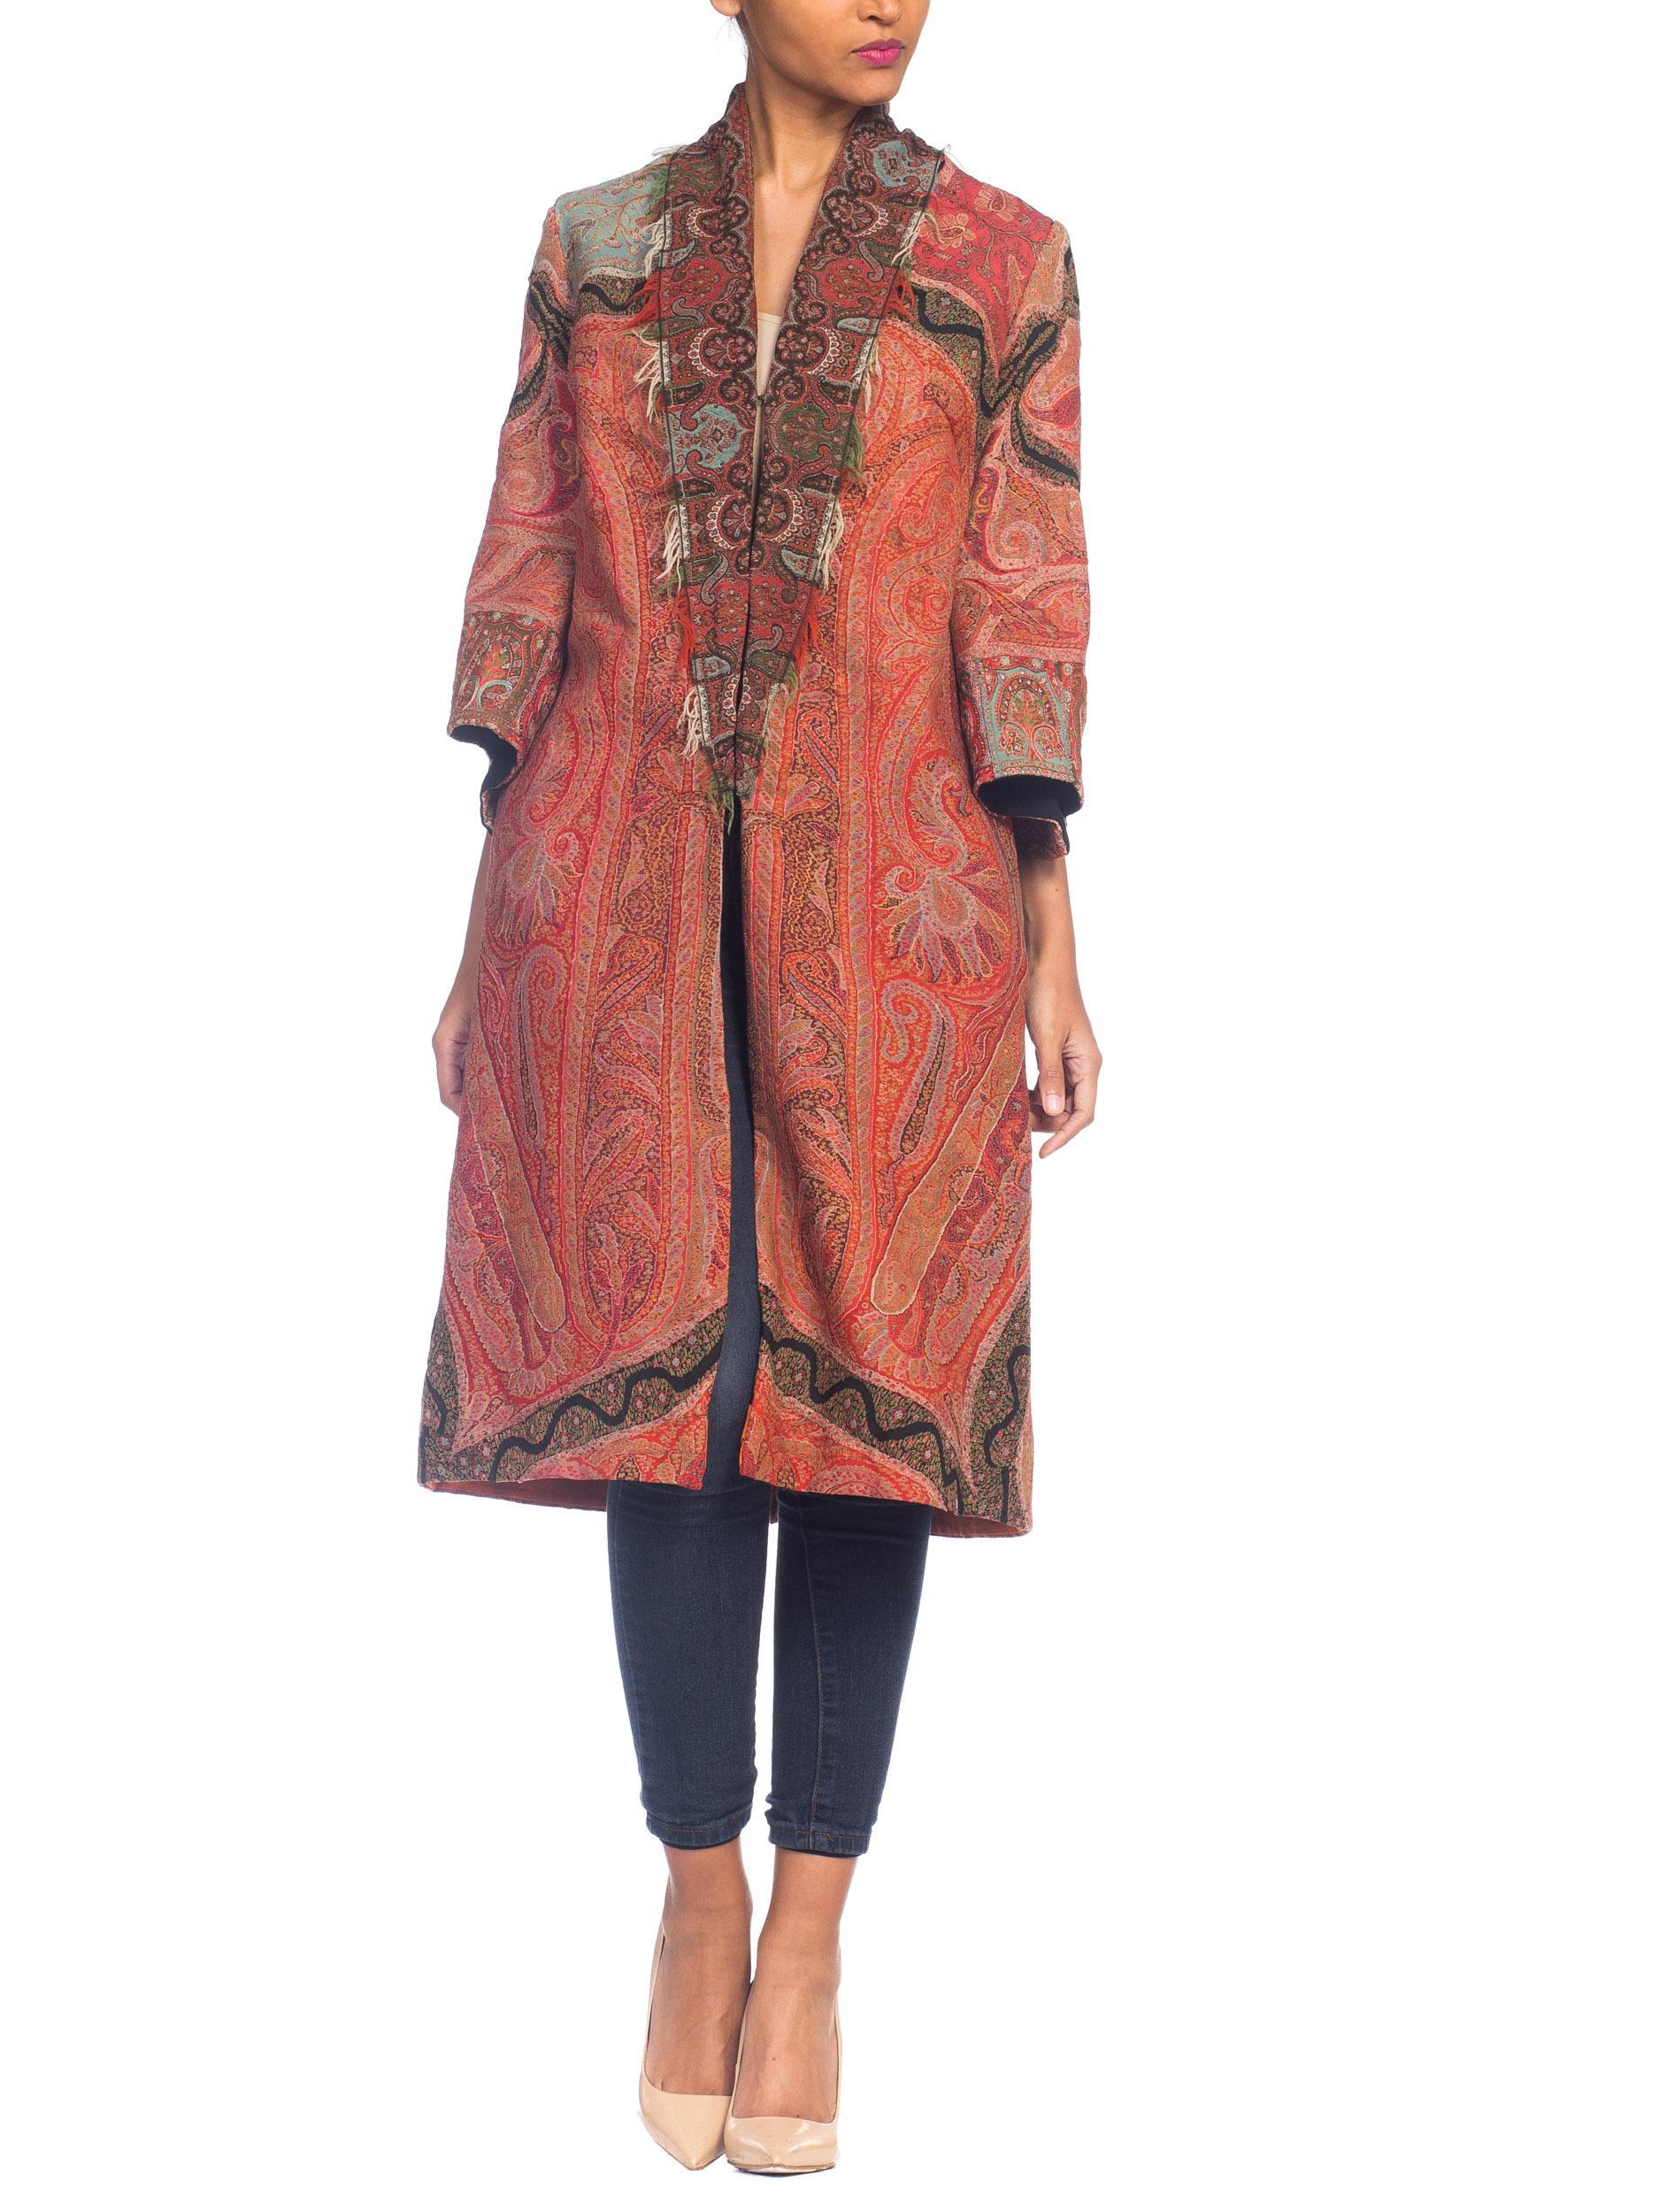 MORPHEW COLLECTION Hand Embroidered Coat Made From Antique Victorian Wool Paisl For Sale 2